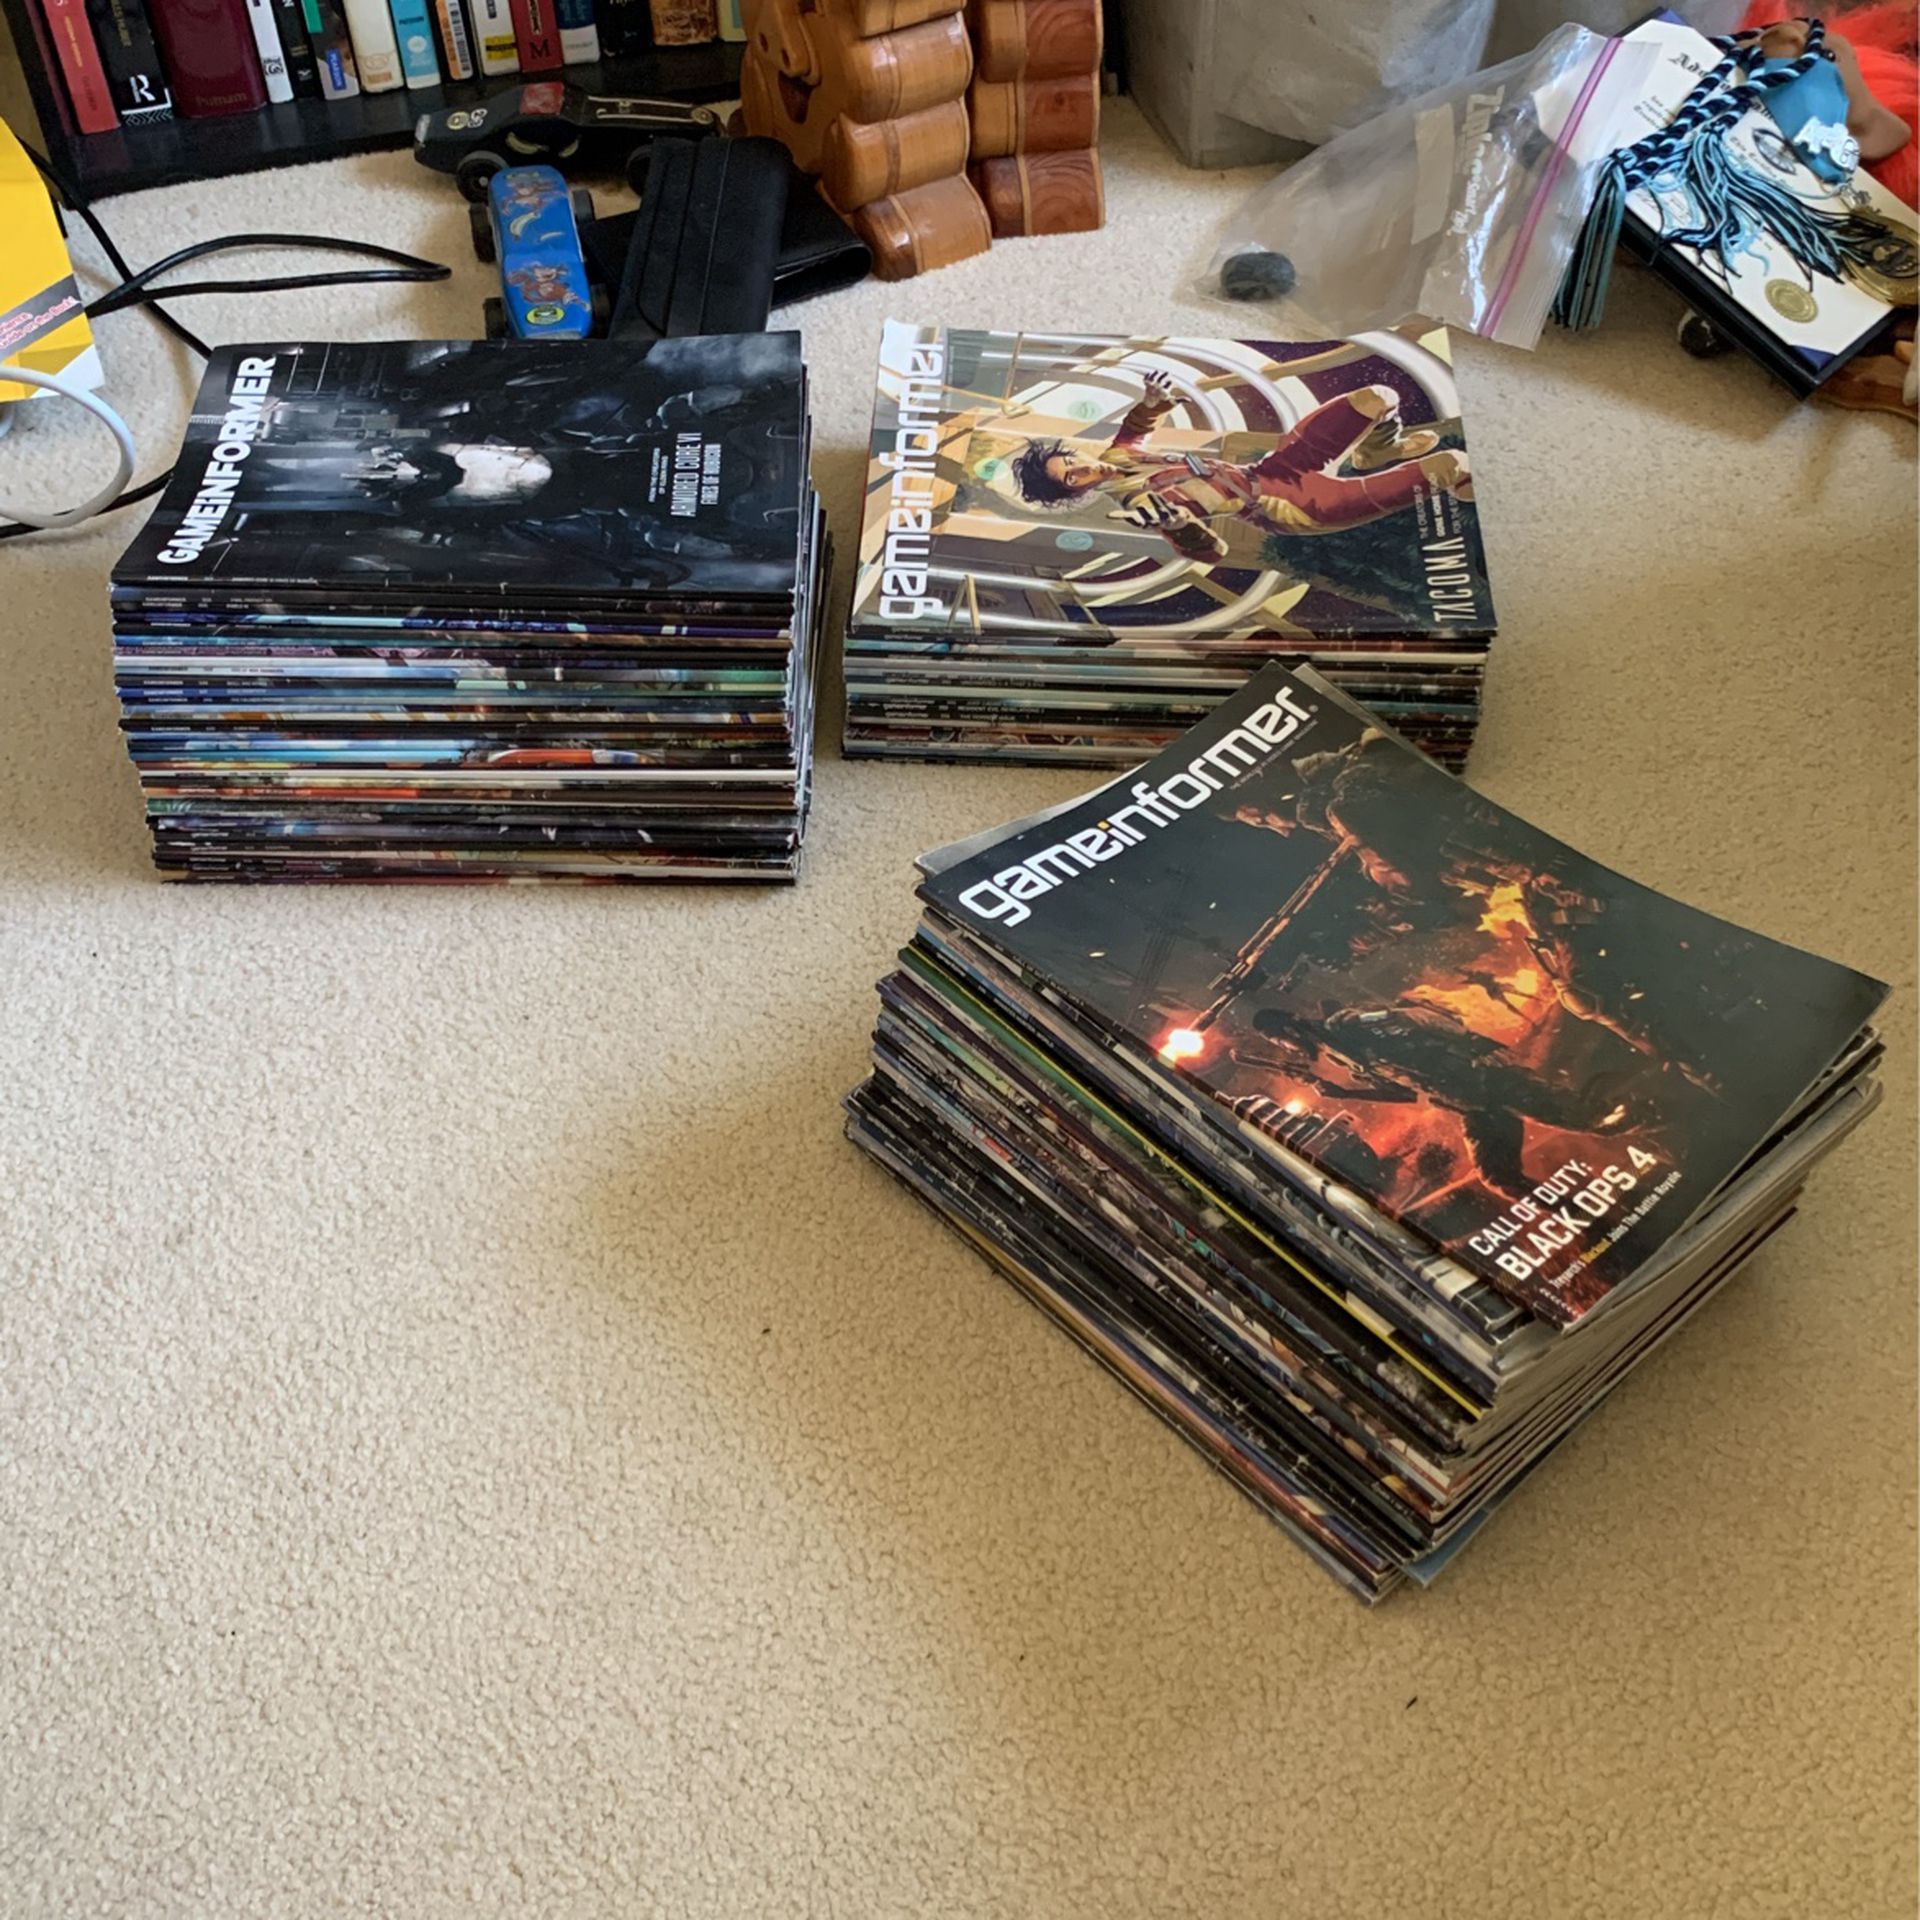 84 Issues of Game Informer